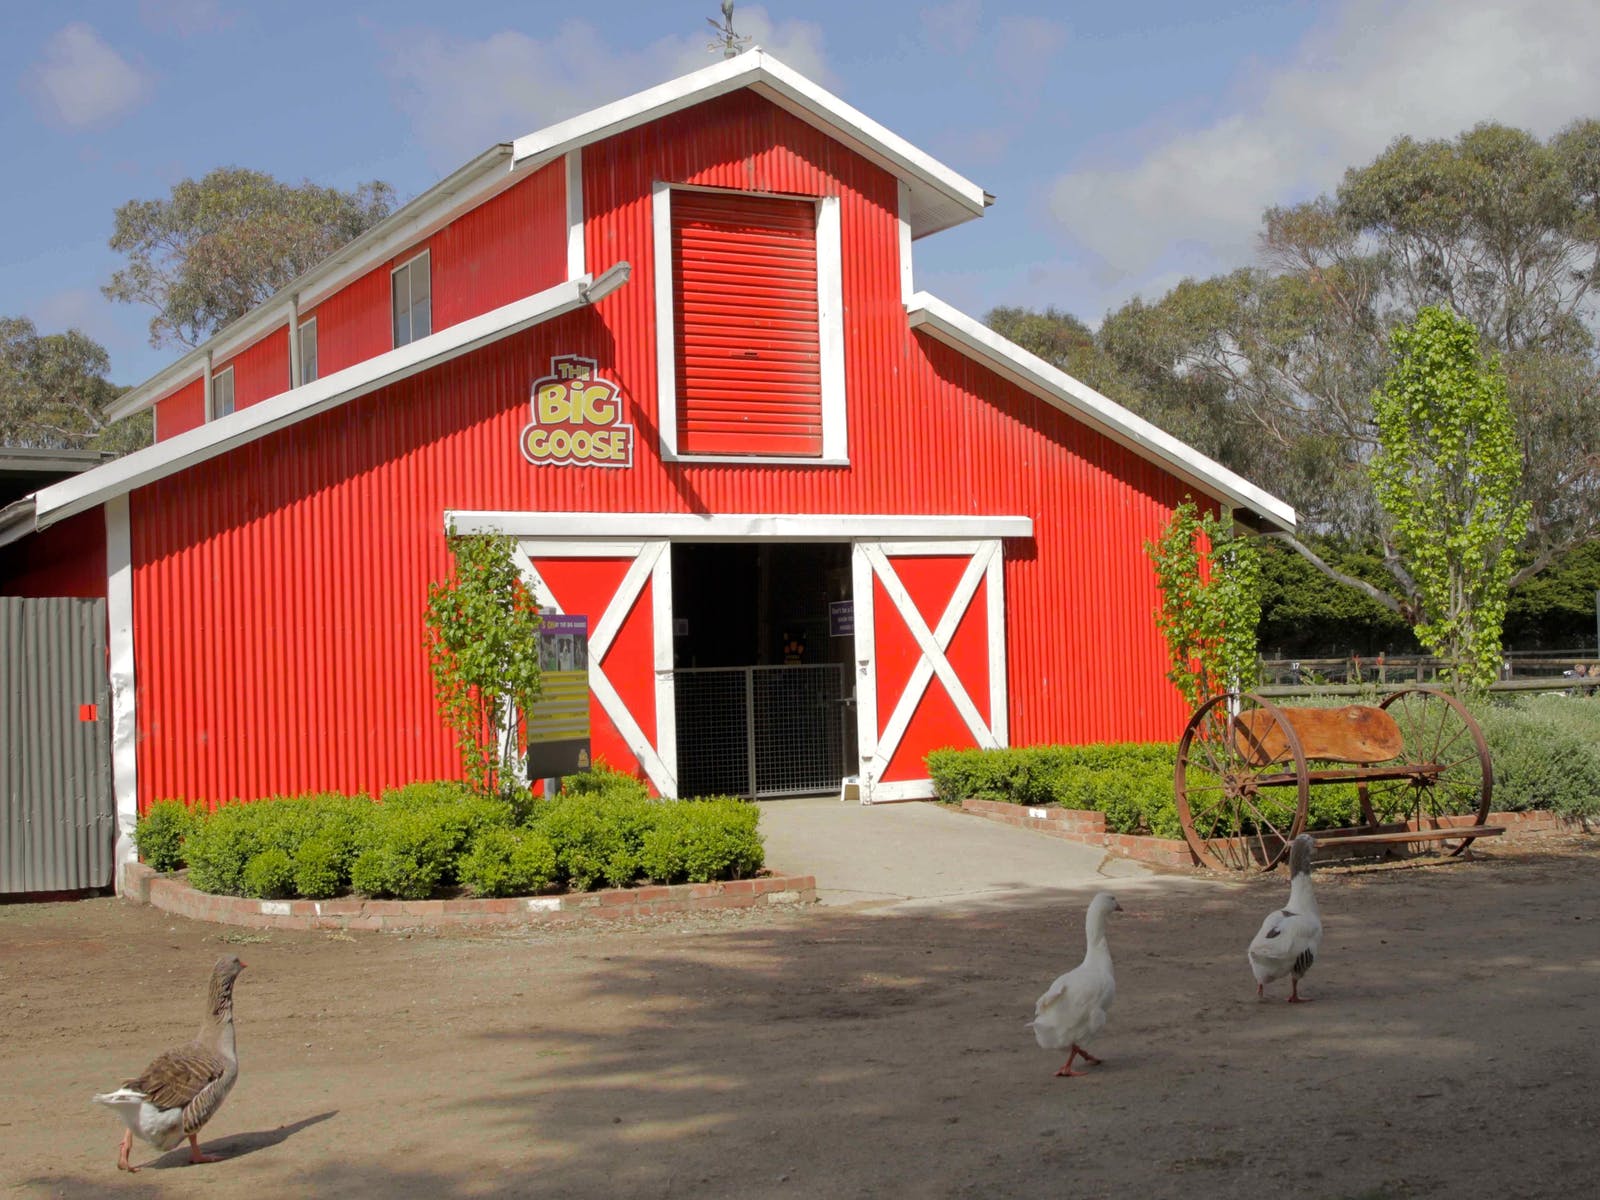 A big red barn that is the Big Goose. 